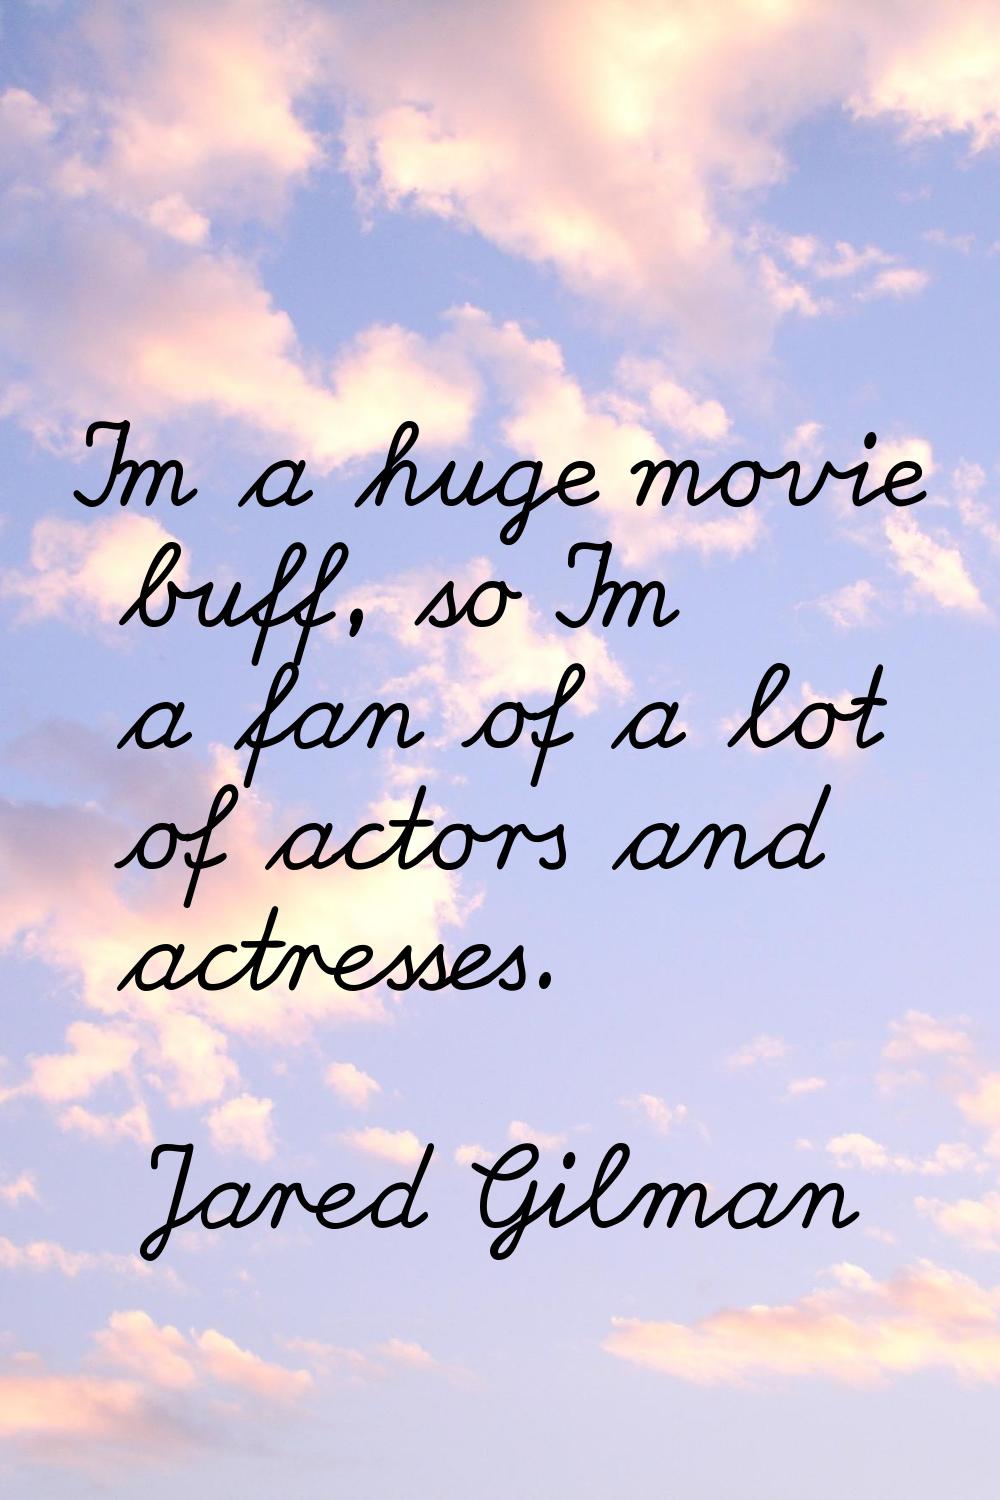 I'm a huge movie buff, so I'm a fan of a lot of actors and actresses.